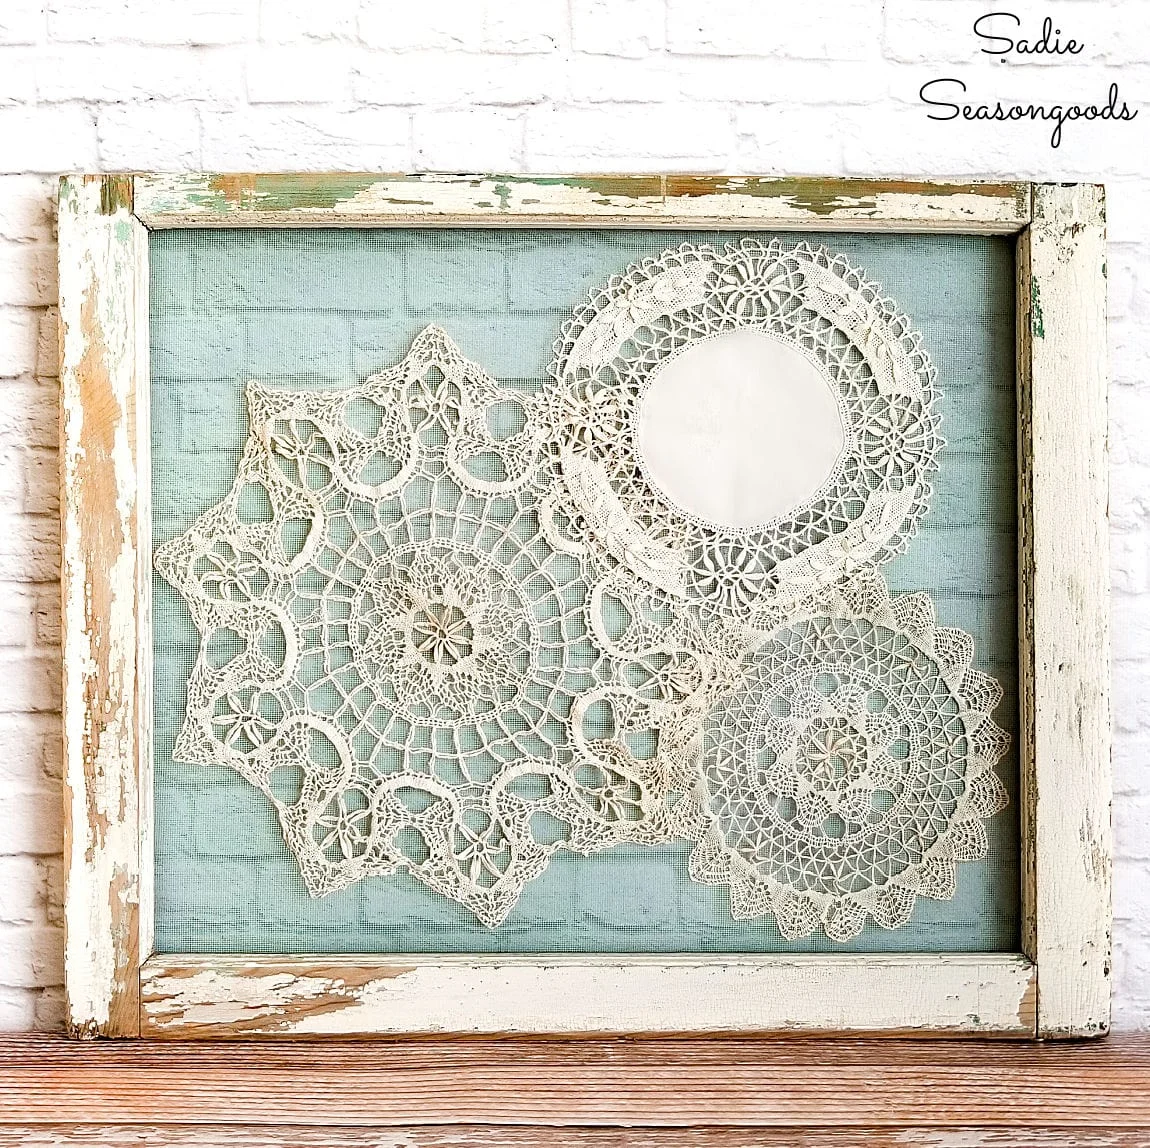 How To Decorate Pumpkins with Vintage Doilies - What Meegan Makes